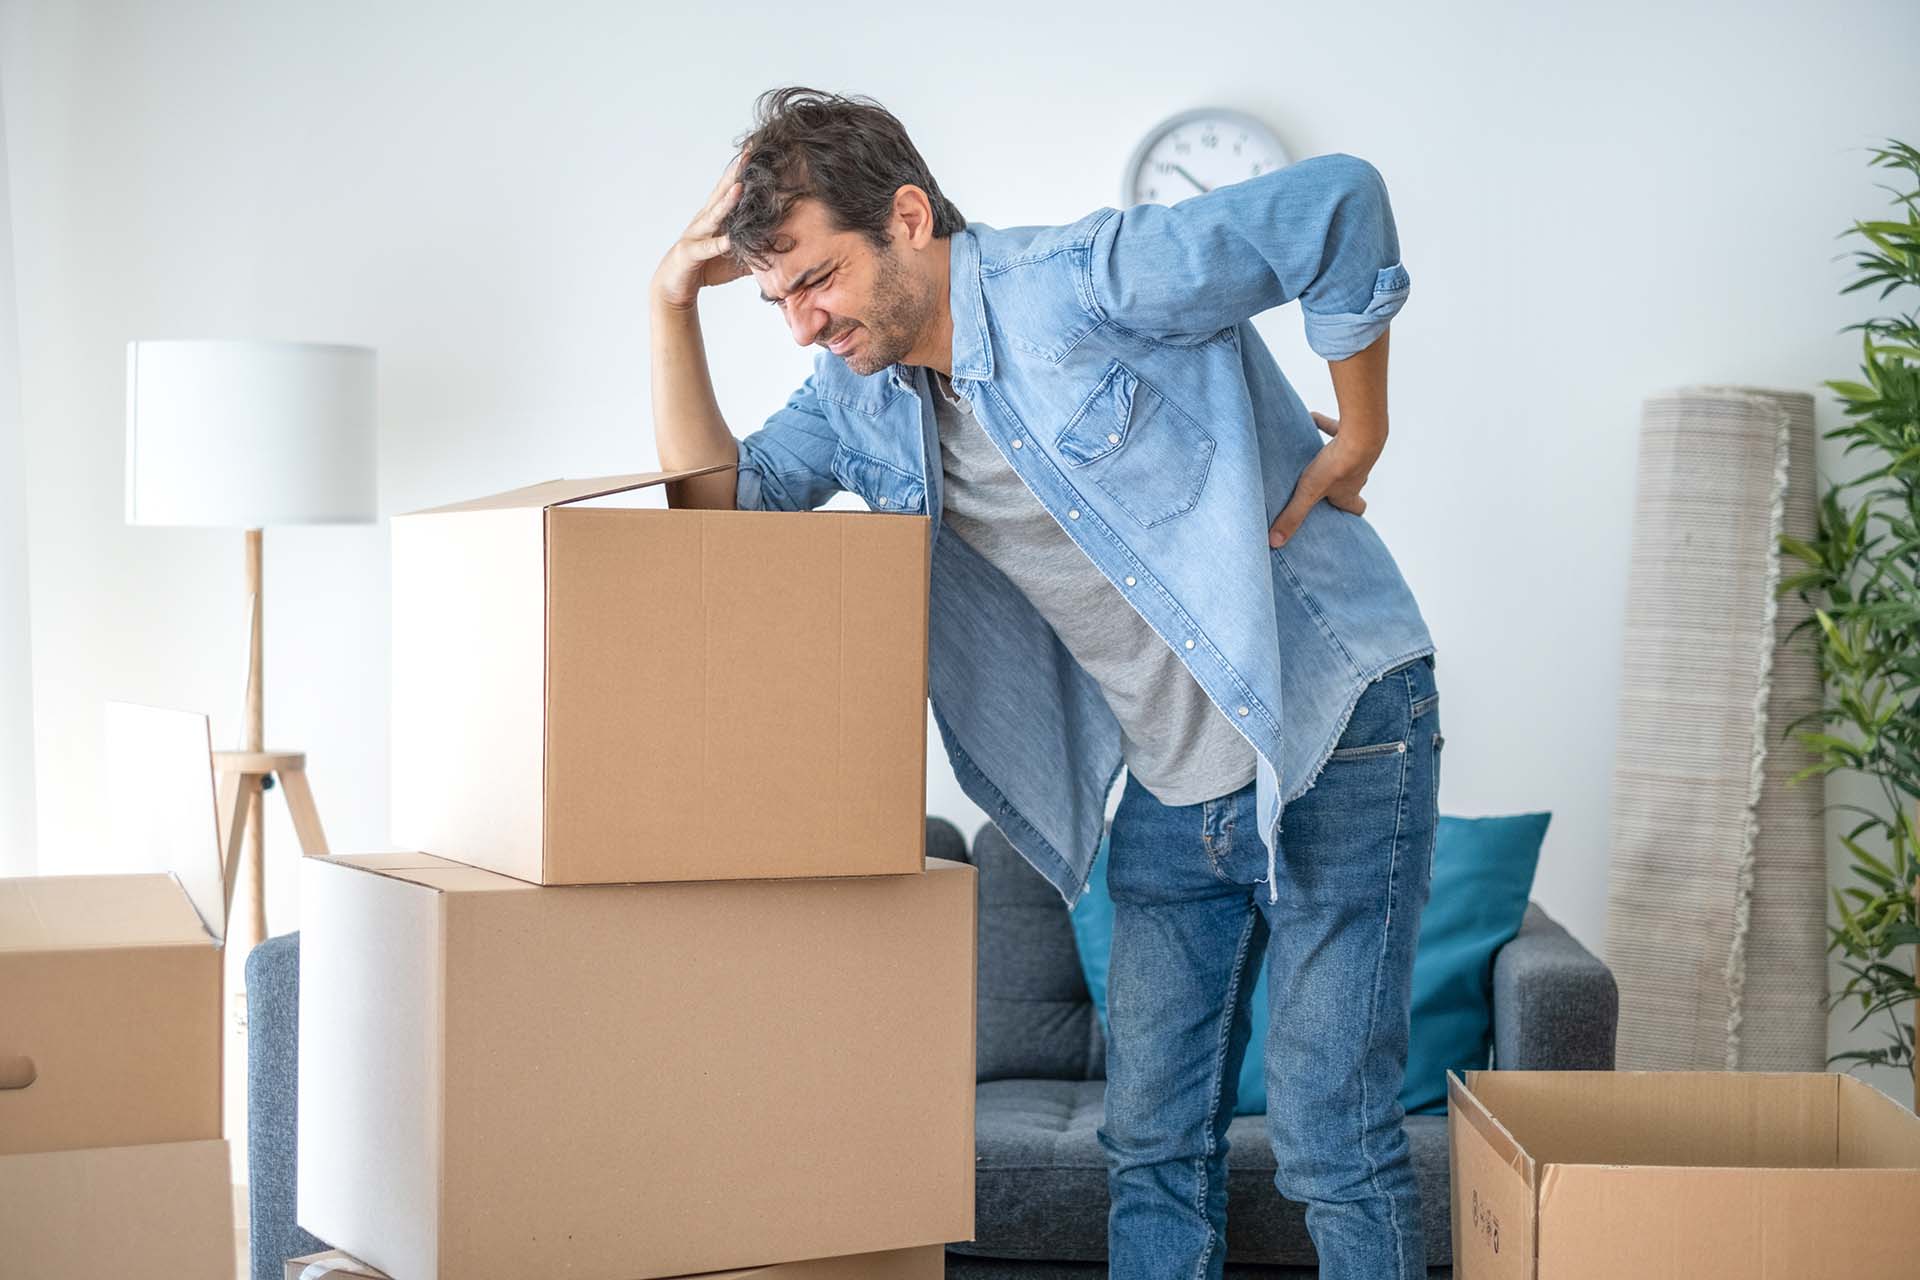 Man lifting boxes and moving into new house suffers backache